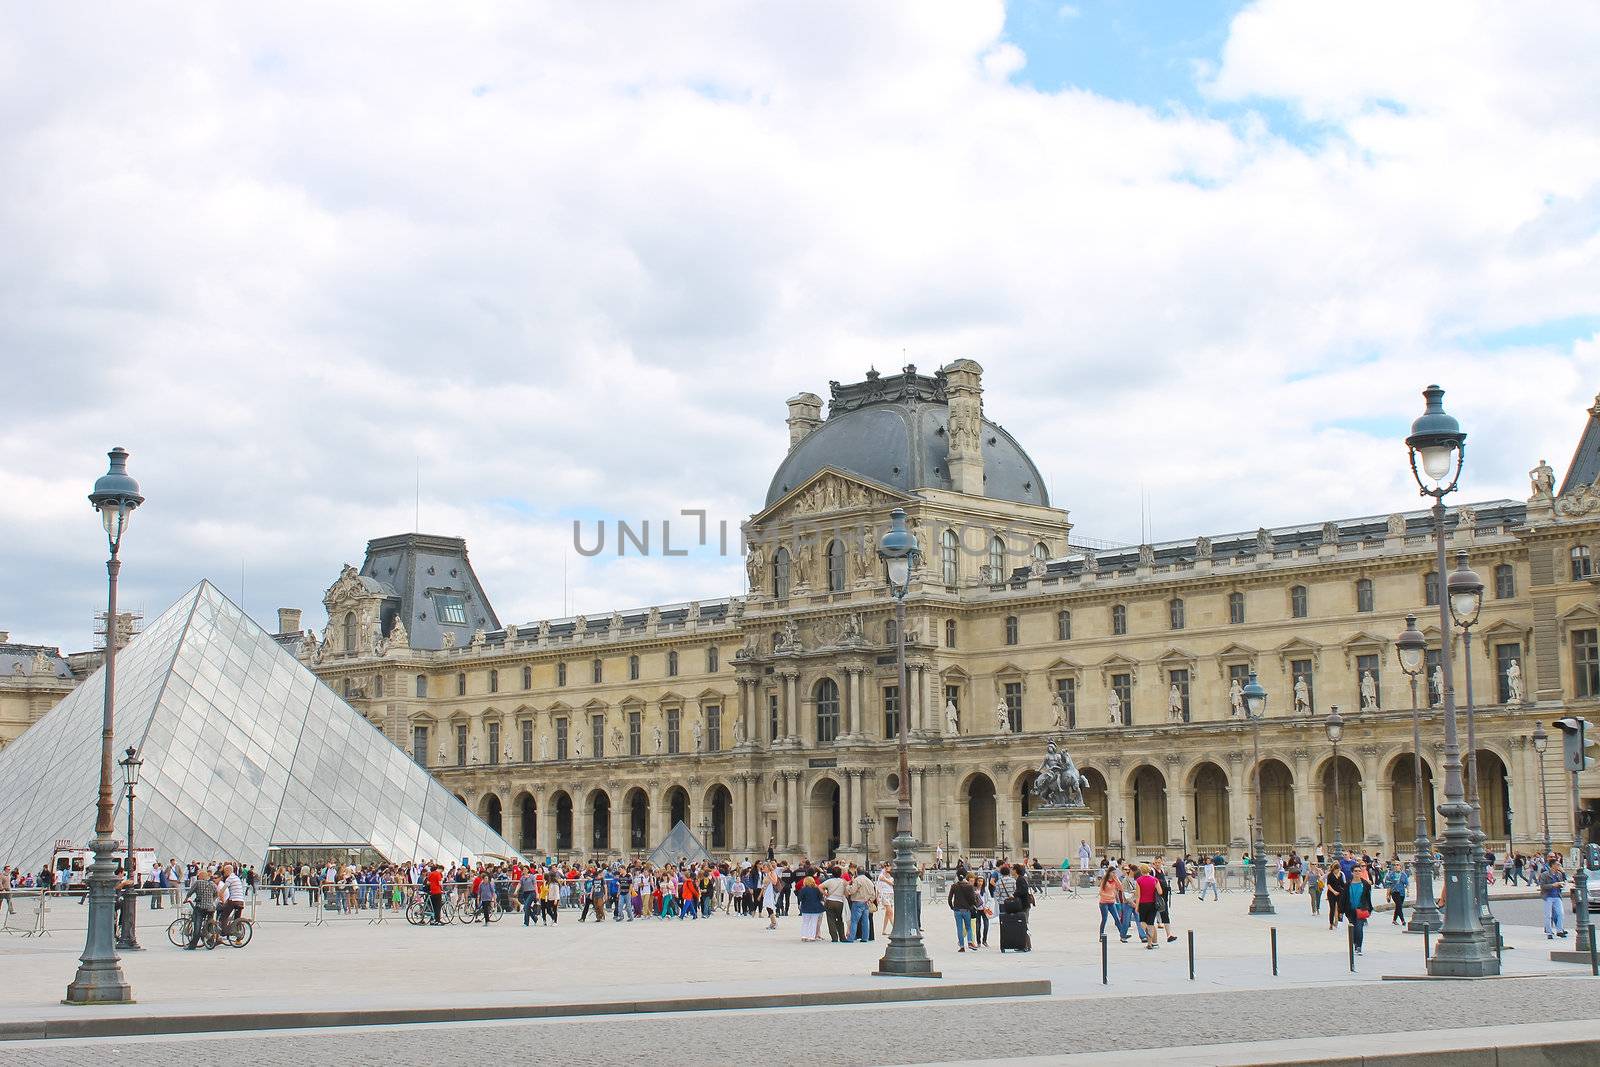 People in the square in front of the Louvre. Paris. France by NickNick